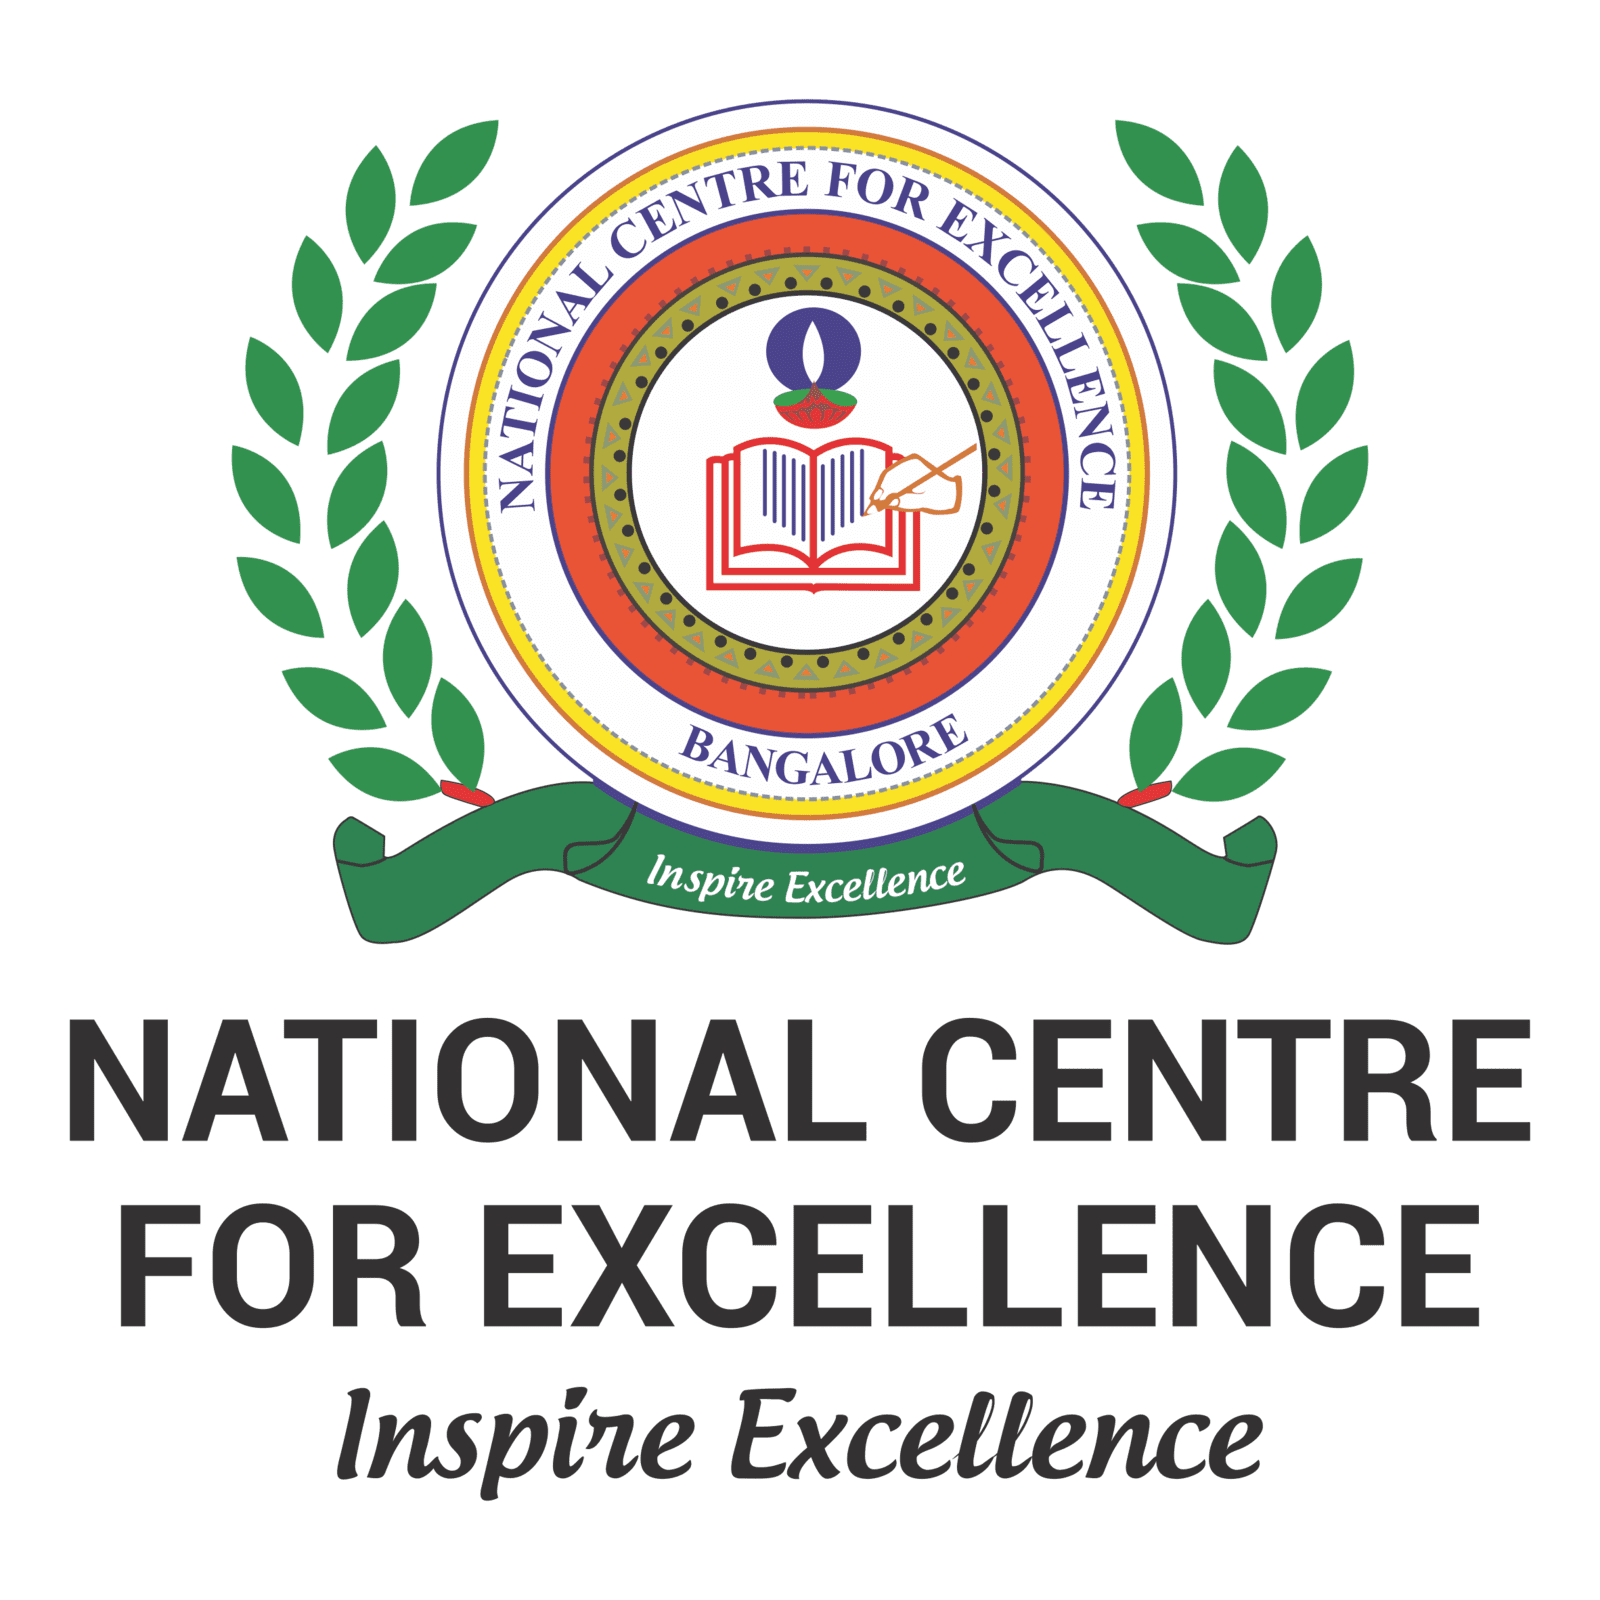 NATIONAL CENTRE FOR EXCELLENCE